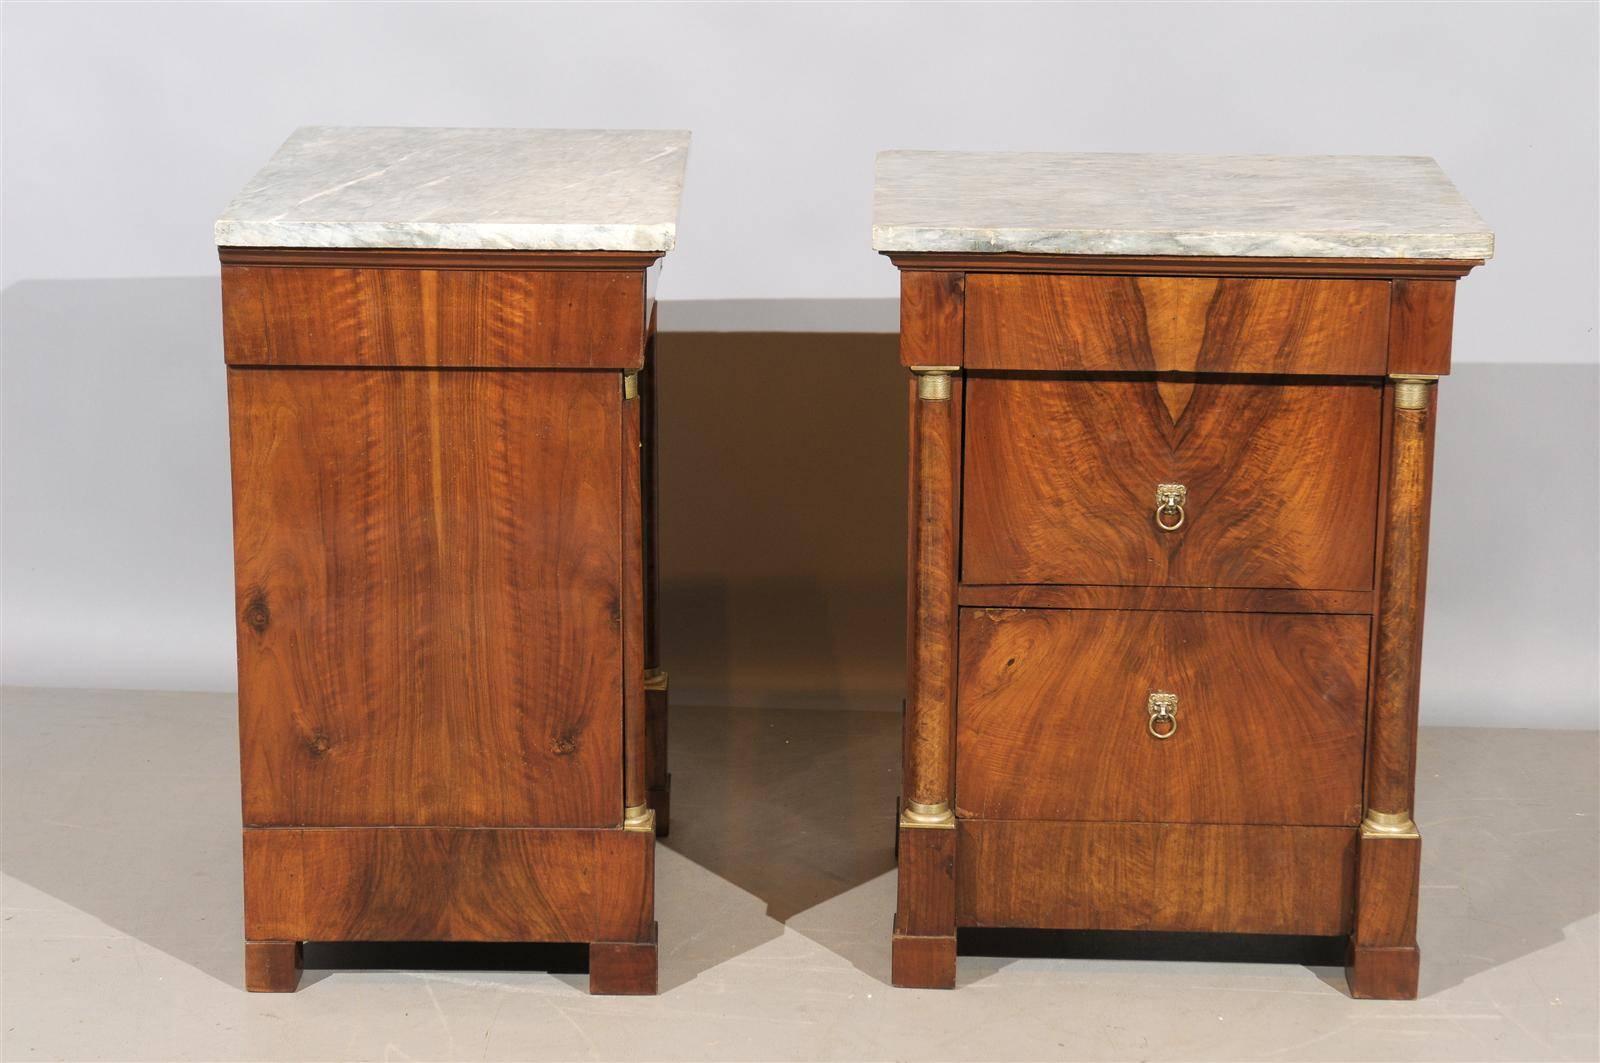 A pair of bedside Empire walnut commodes with grey marble tops, 3 drawers and cabinets. 

